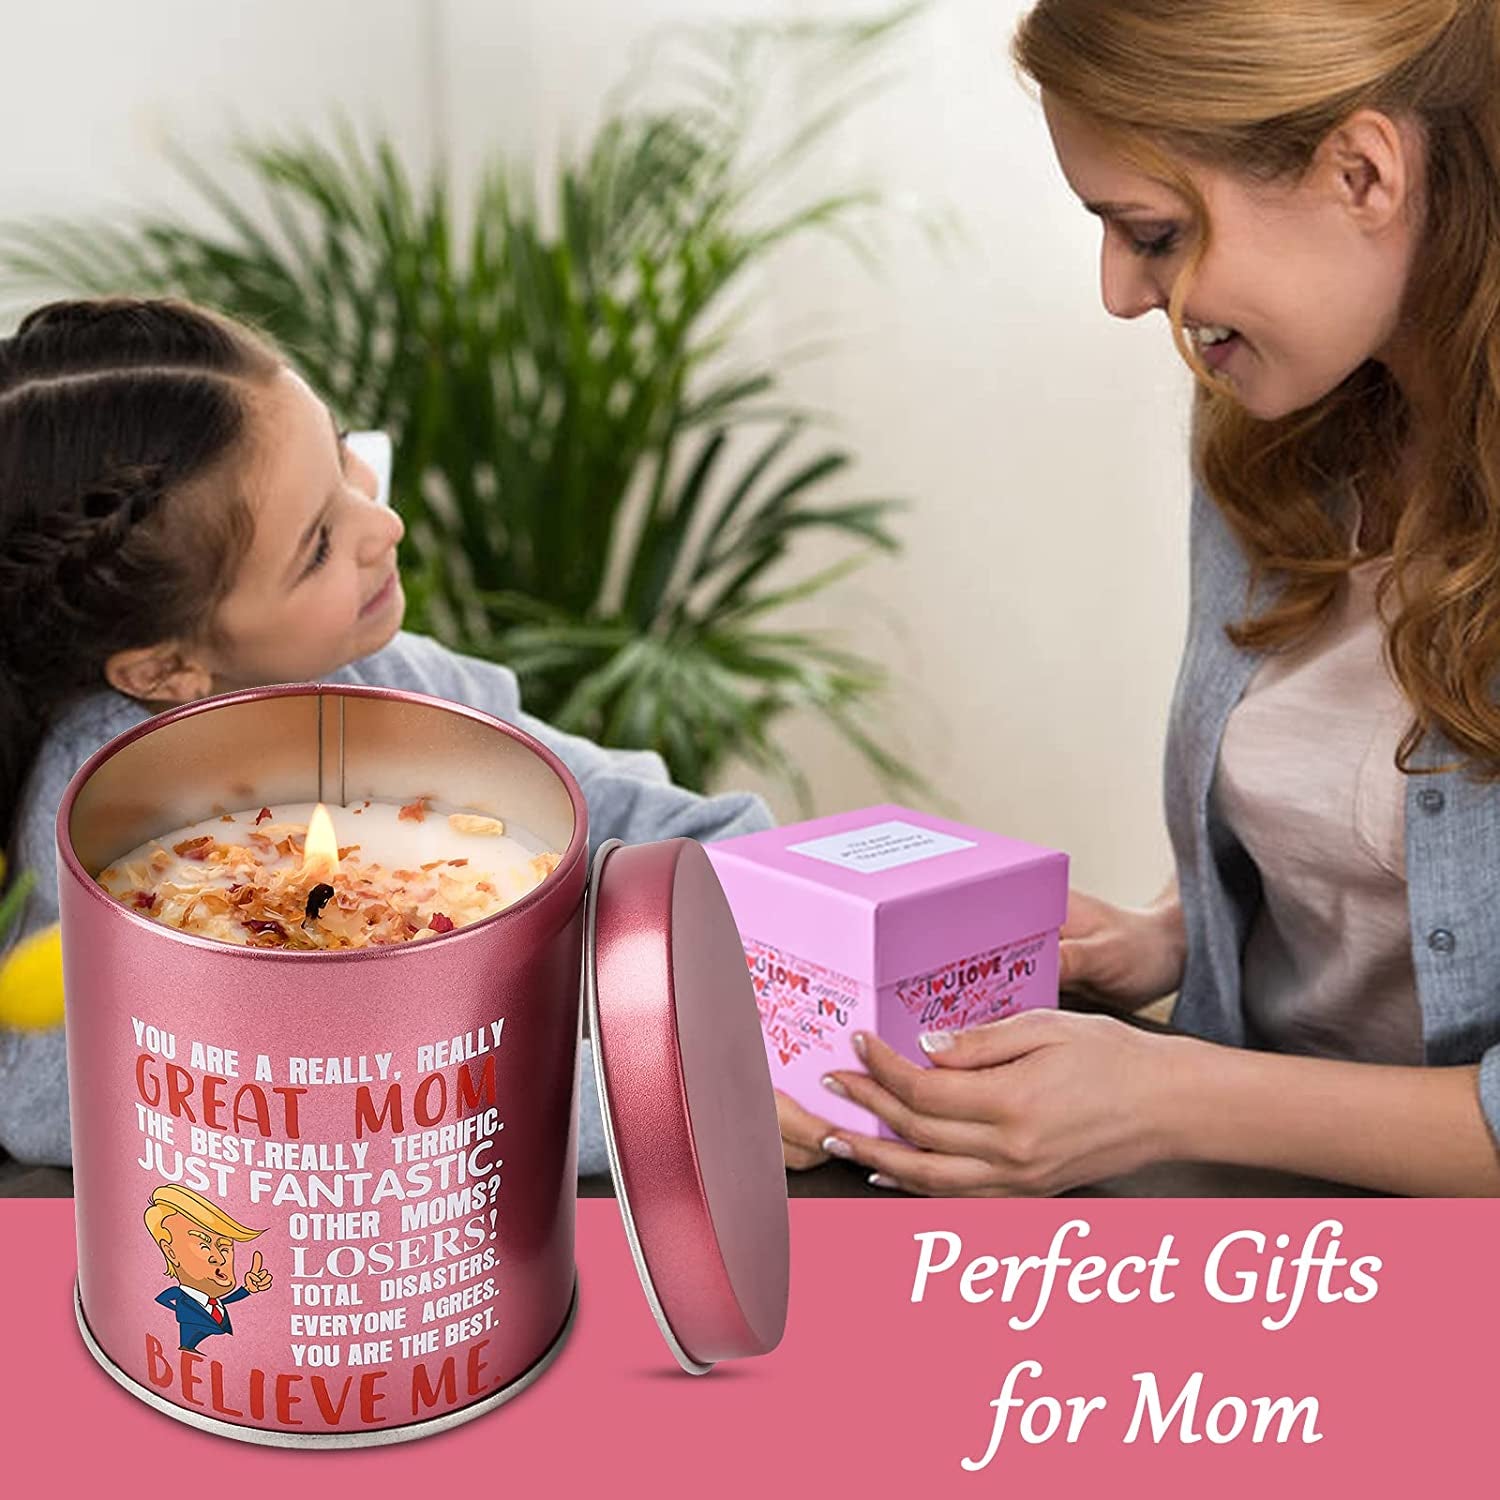 Mothers Day Gifts,You are A Really Great Mom Gardenia 9oz